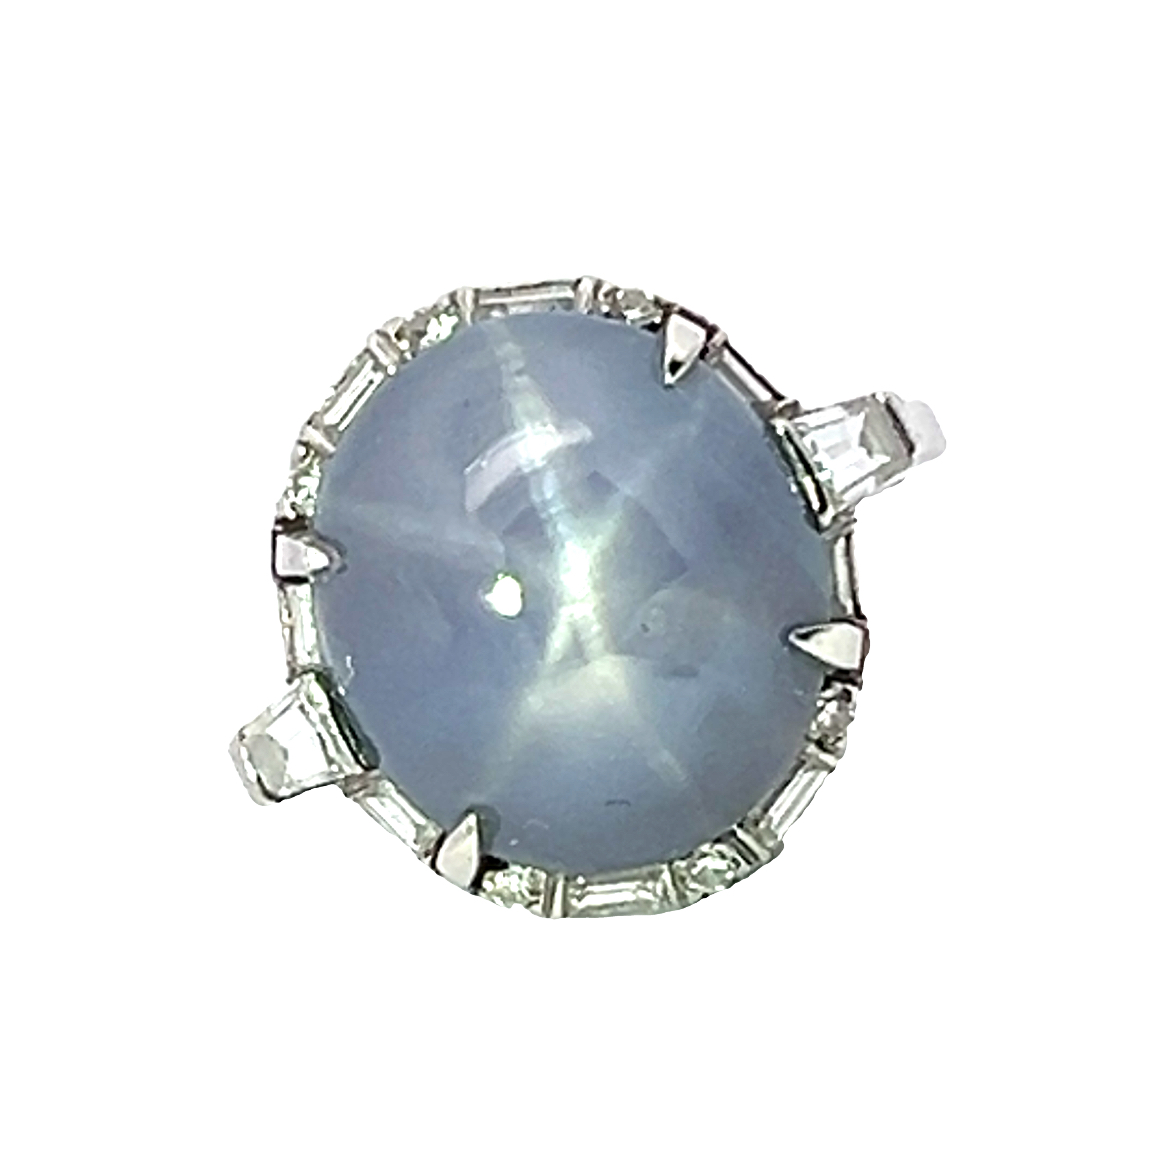 A White Gold Star Sapphire and Diamond Ring